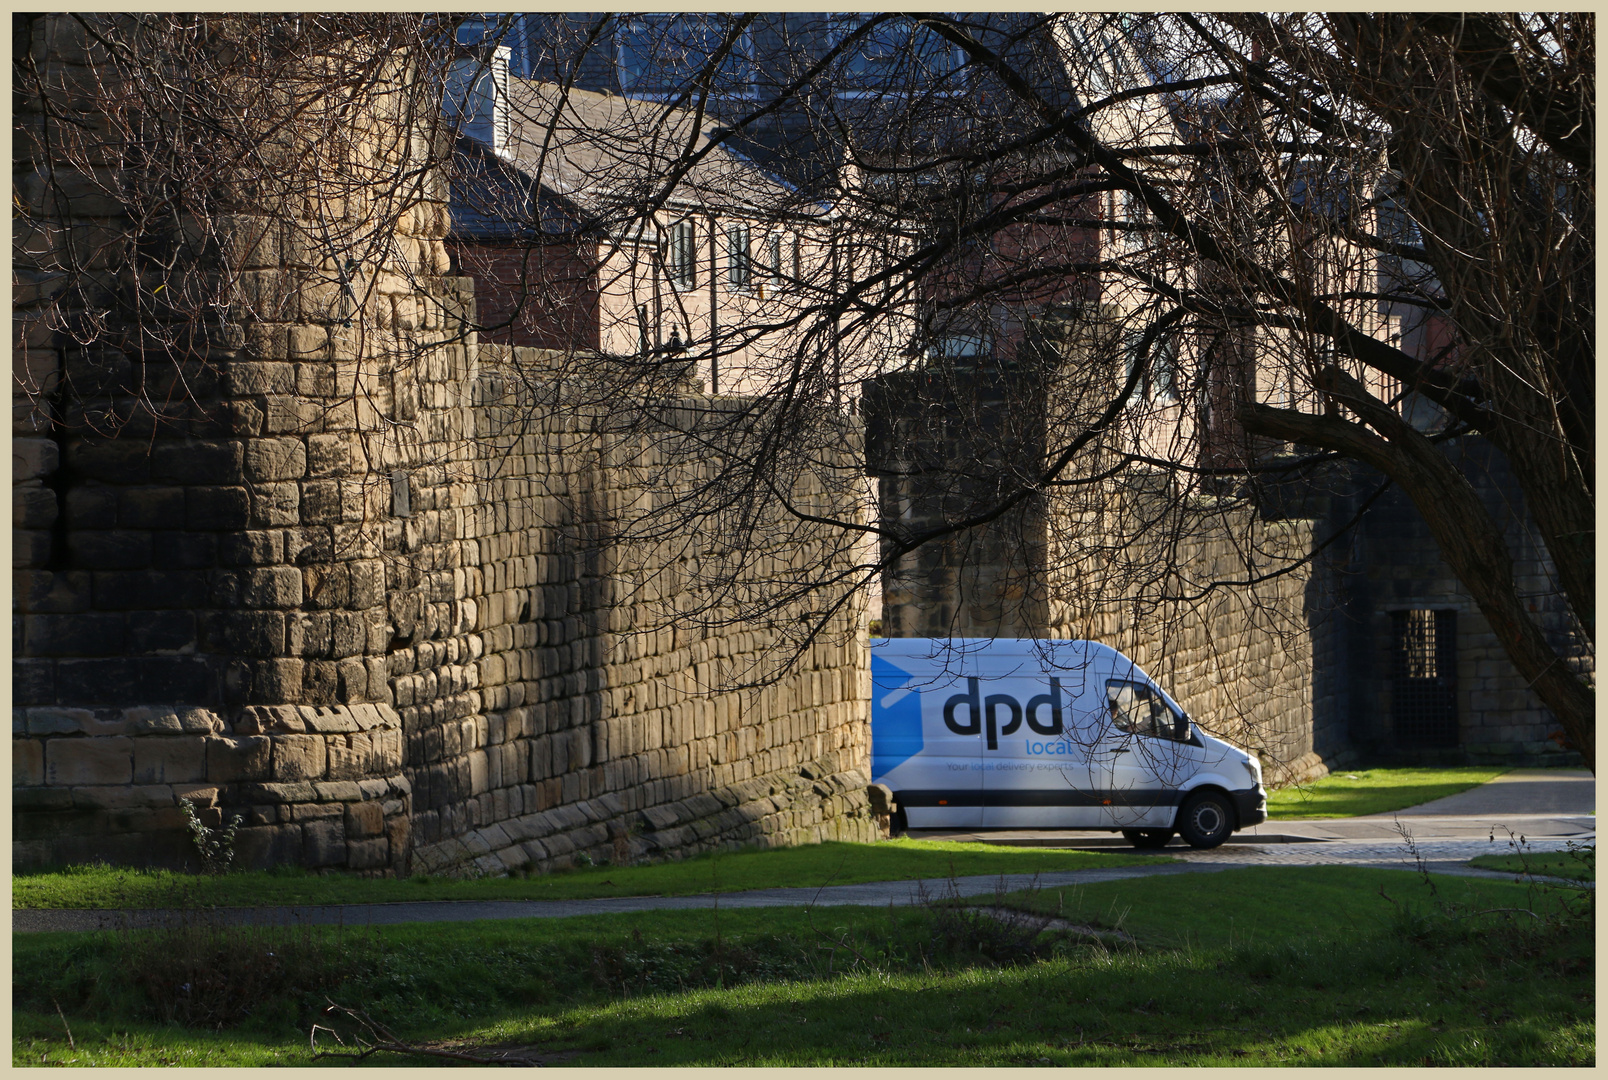 internet delivery van cutting through the medieval city walls of newcastle